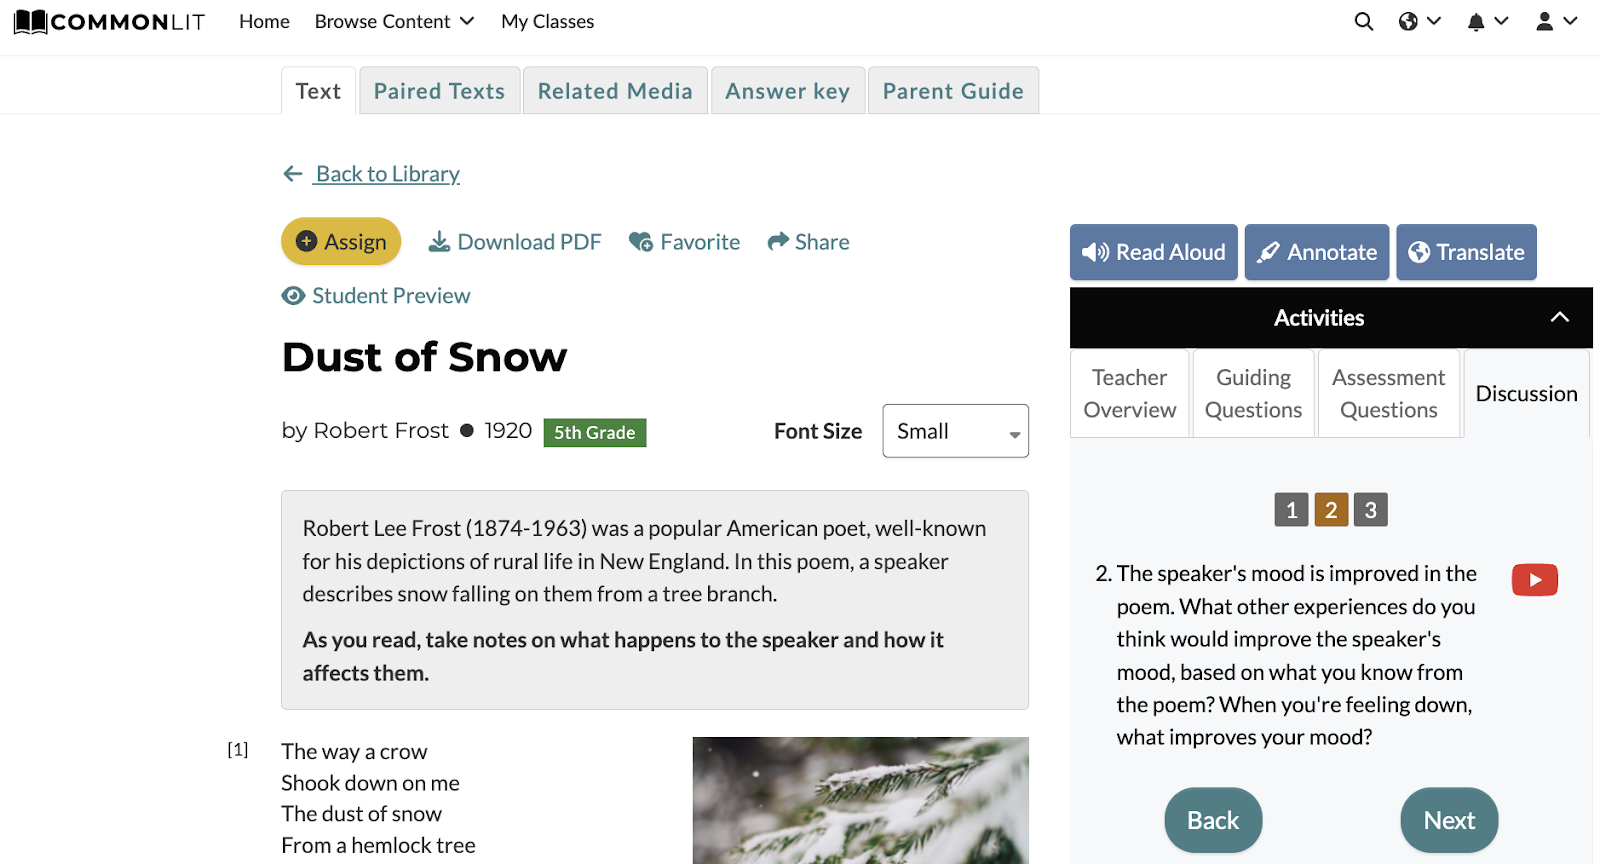 Screenshot of a Robert Frost winter poem, called “Dust of Snow,” from the CommonLit Library